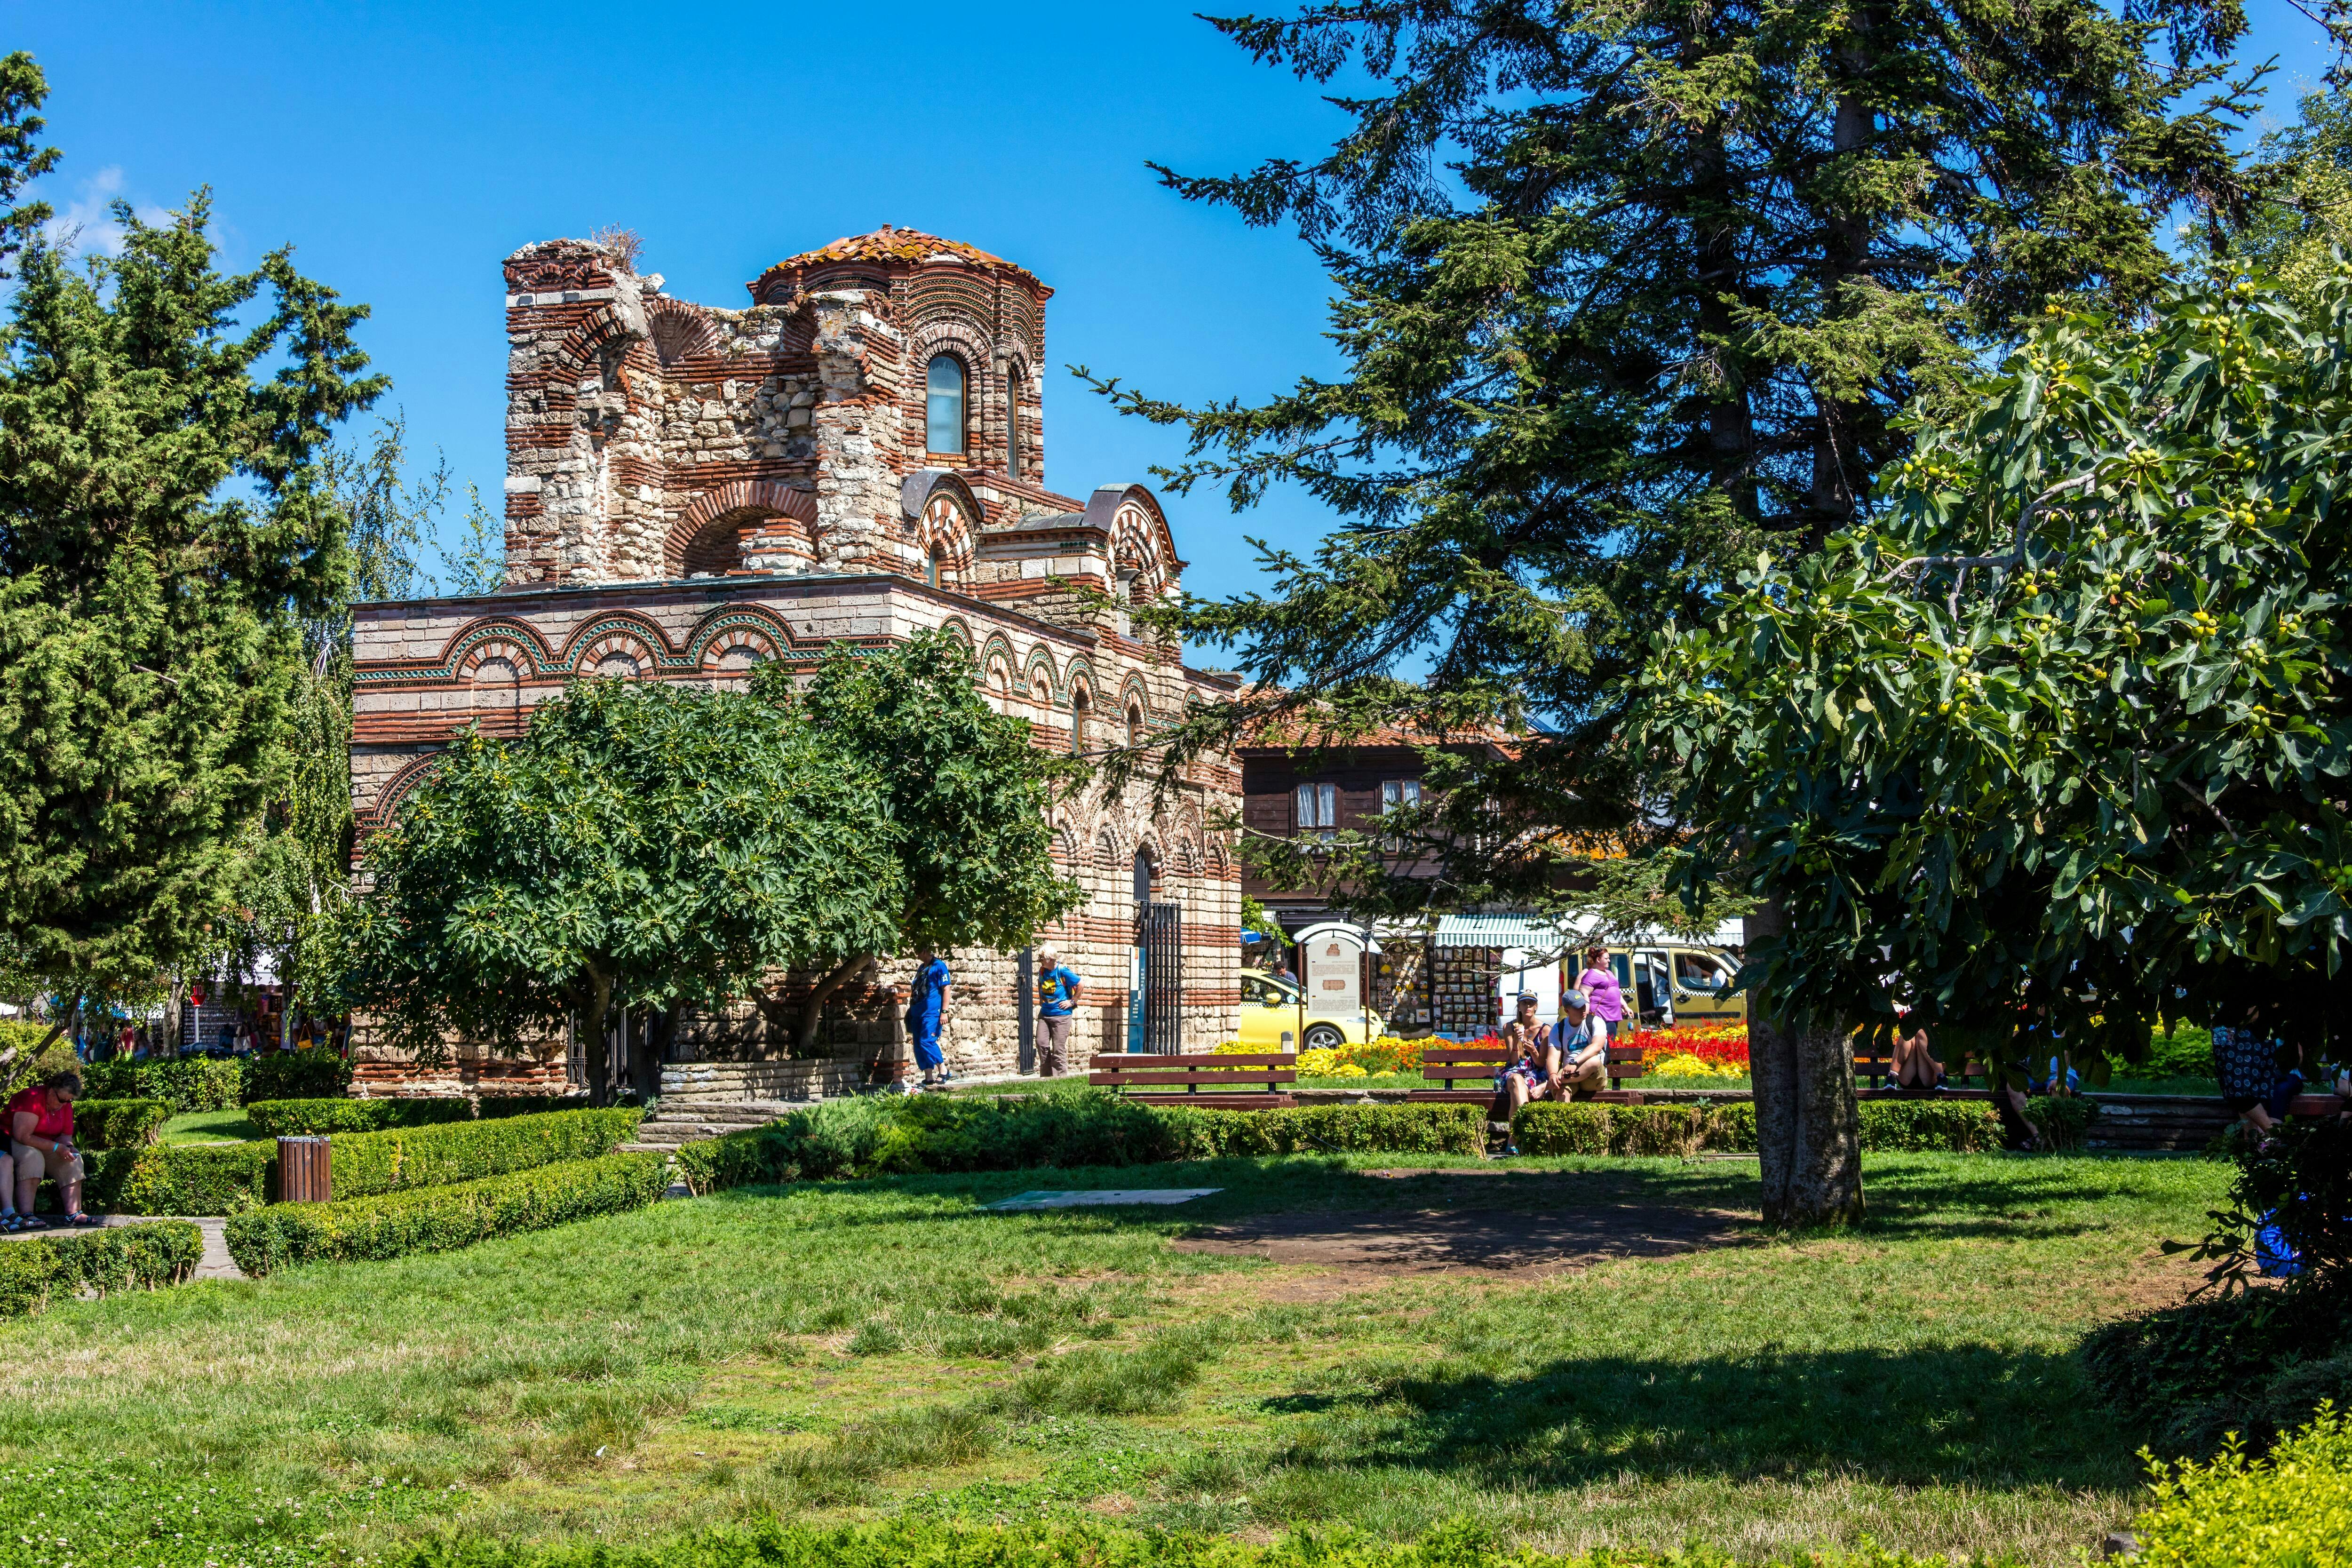 Nessebar Small Group Tour with Wine Tasting Experience